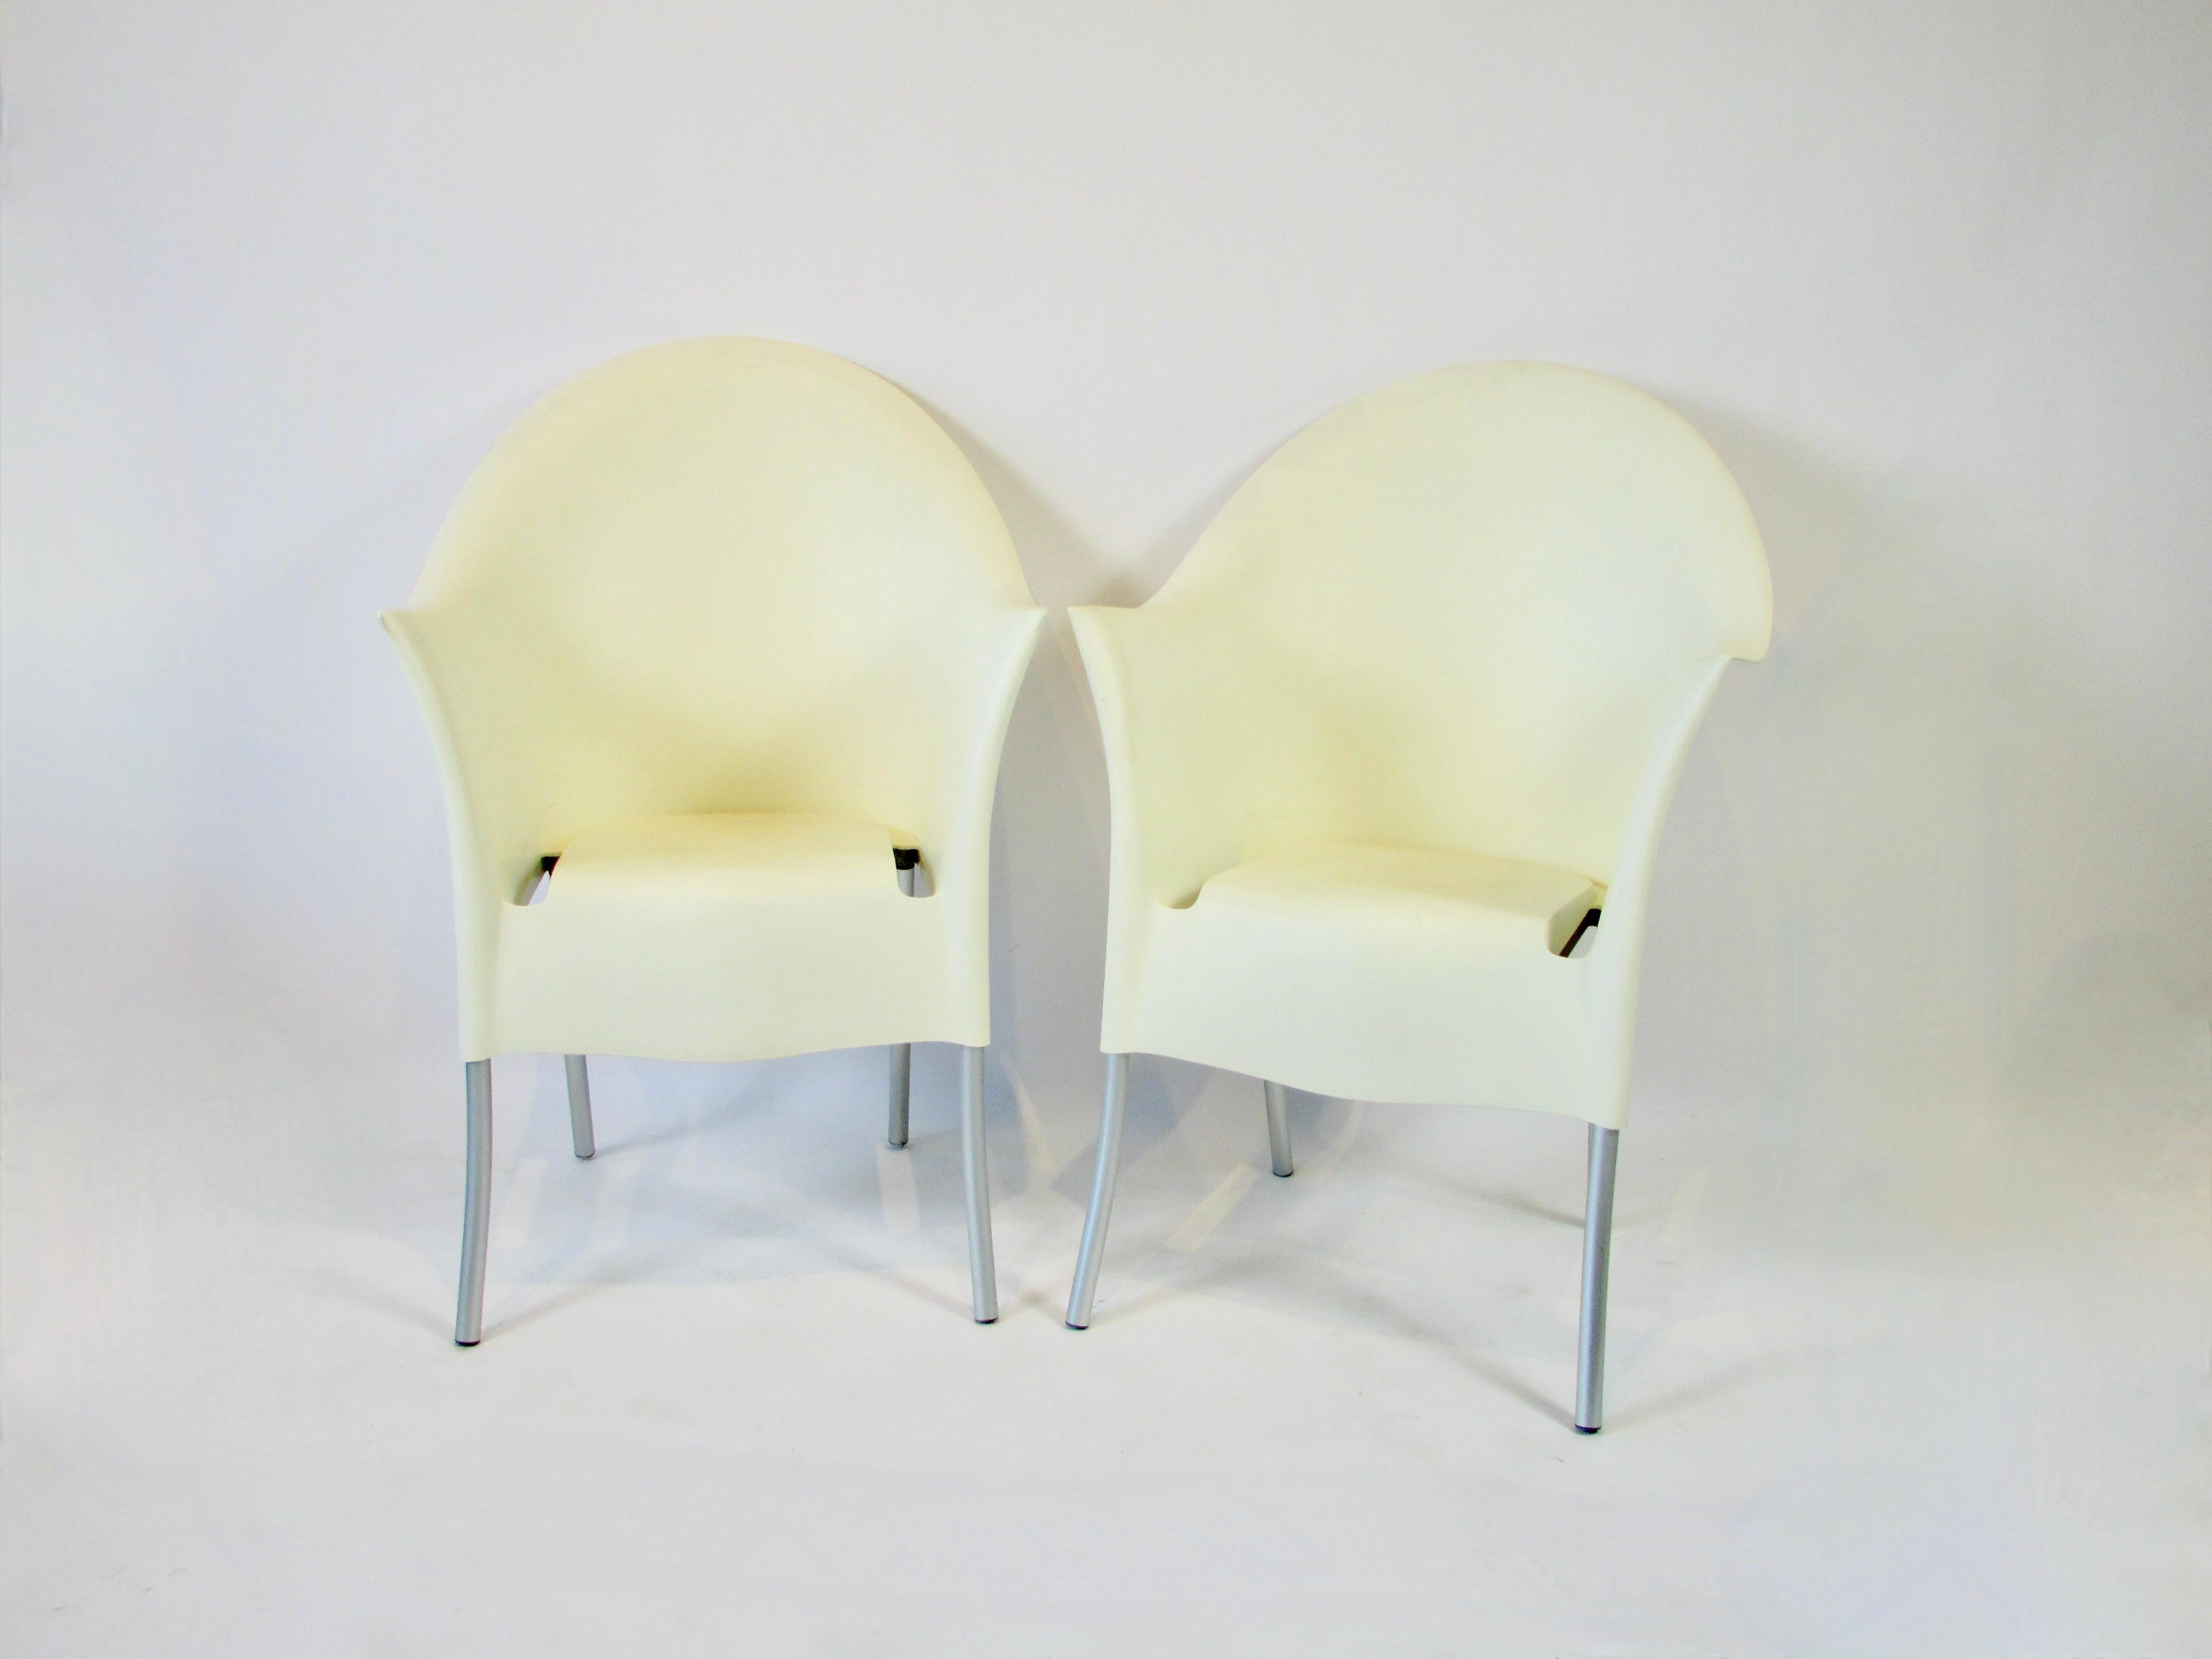 Set of four Phillipe Starck stacking or nesting lounge chairs. Well marked on underside Aleph by Starck Made in Italy, Lord YO by Sark Made in Italy. Well made chairs. Polypropylene shell bolts to Aluminum frame. Maybe the most comfortable and